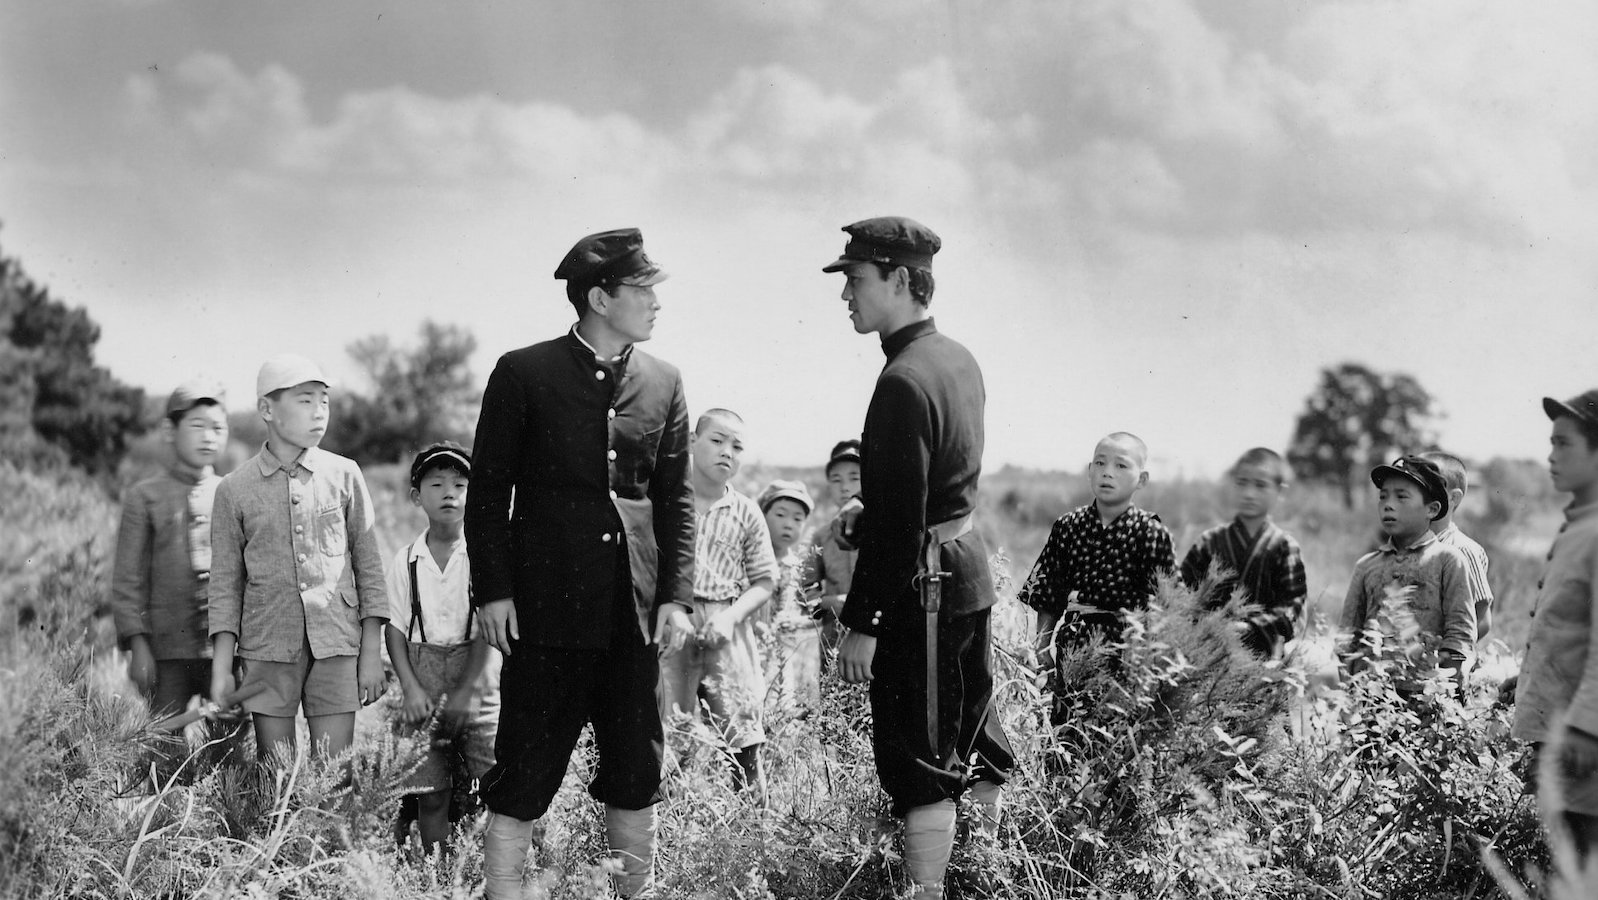 A black and white photo of two men in hats and uniforms standing and facing each other in a field of grass amidst other children figures who surround and watch them.